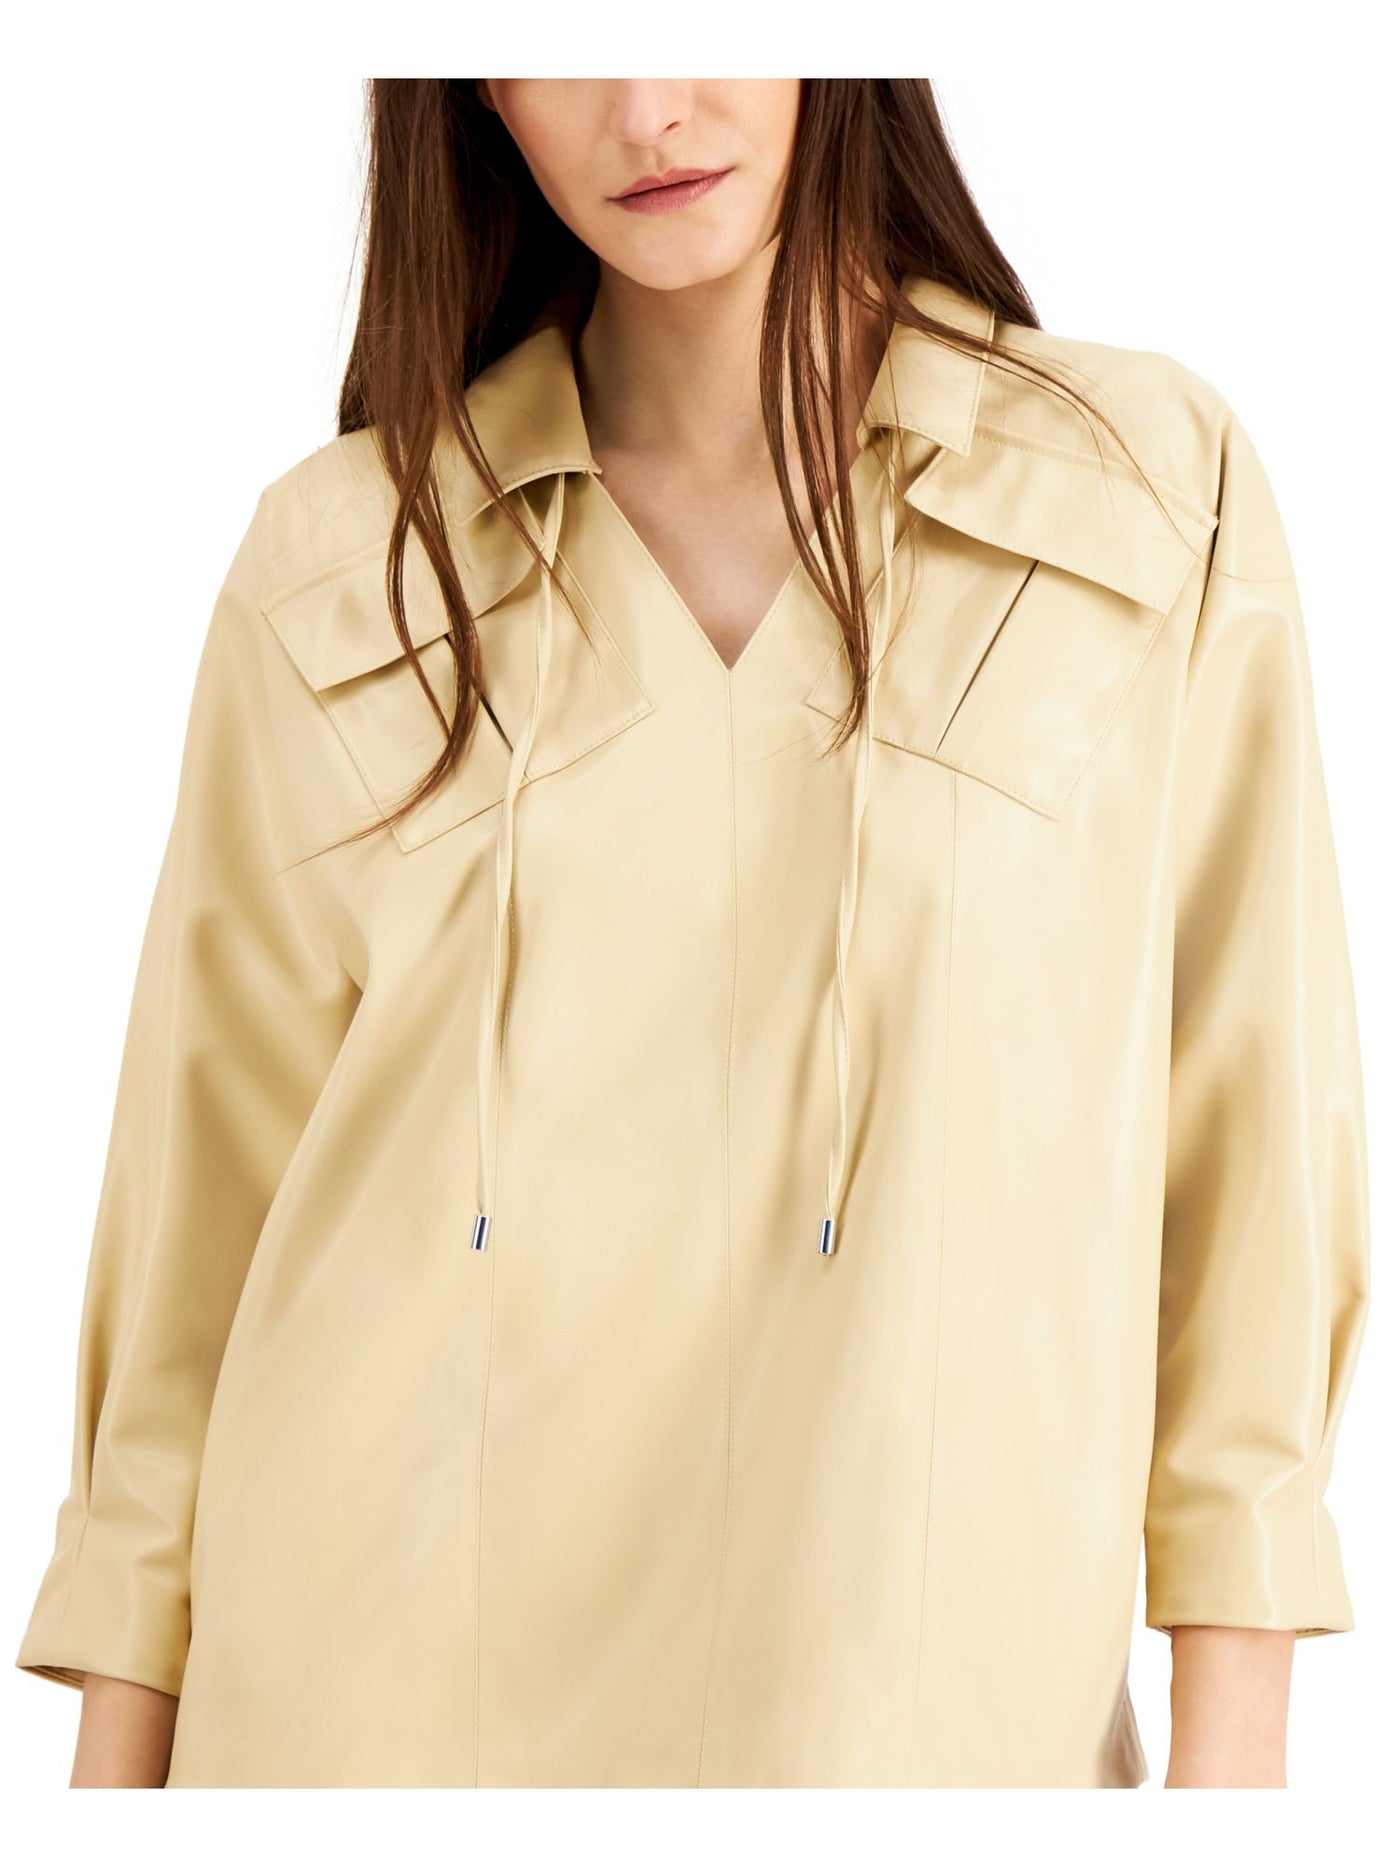 ALFANI Womens Beige Pocketed Drawstring Neck 3/4 Sleeve Point Collar Top L